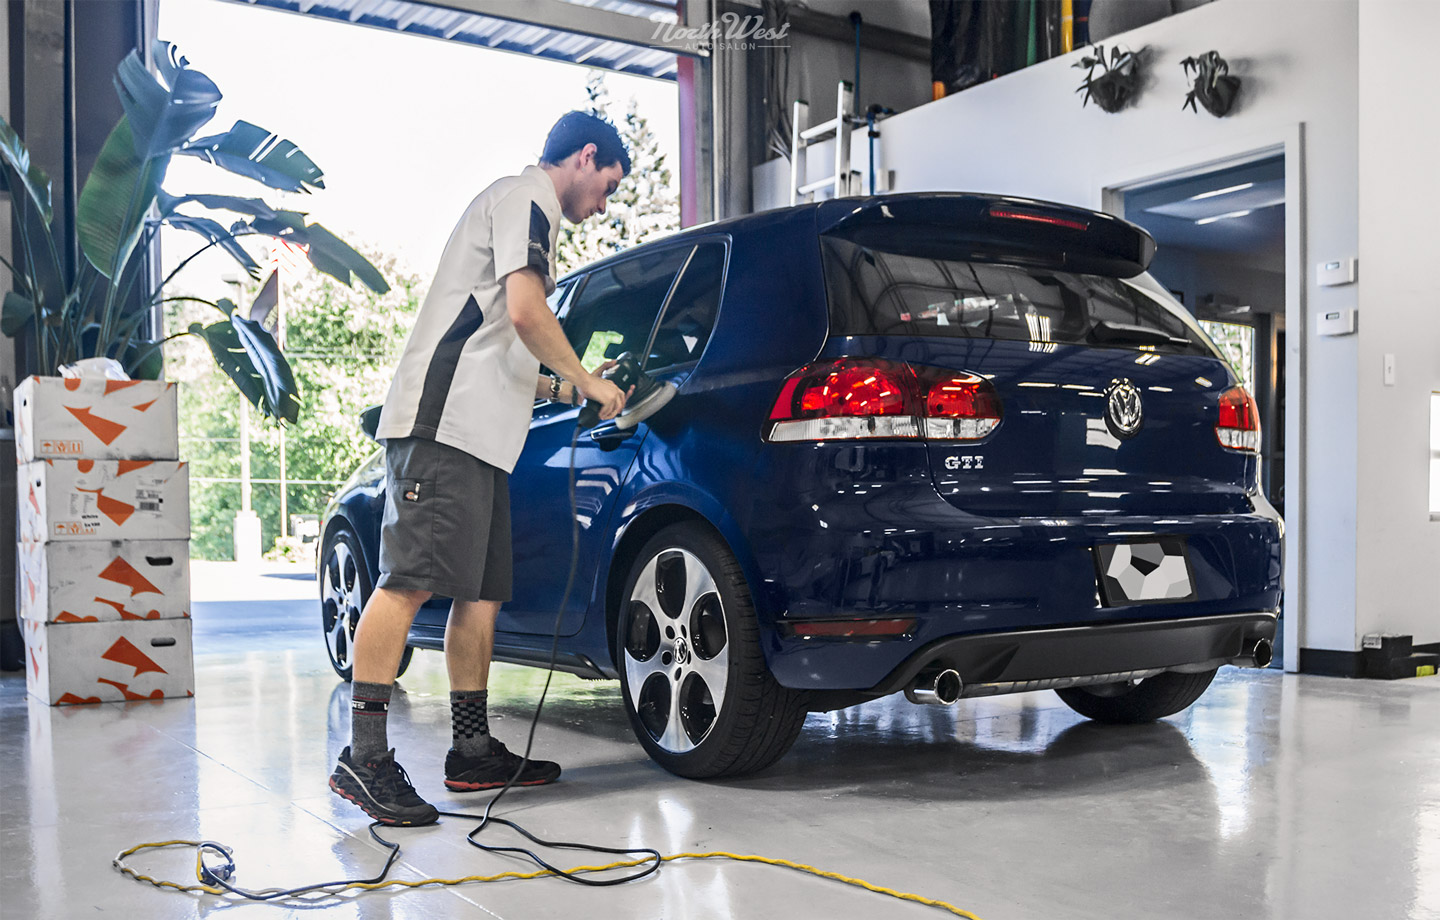 VW-GTI-key-scratch-removal-paint-touch-up-protect-detail-package-1